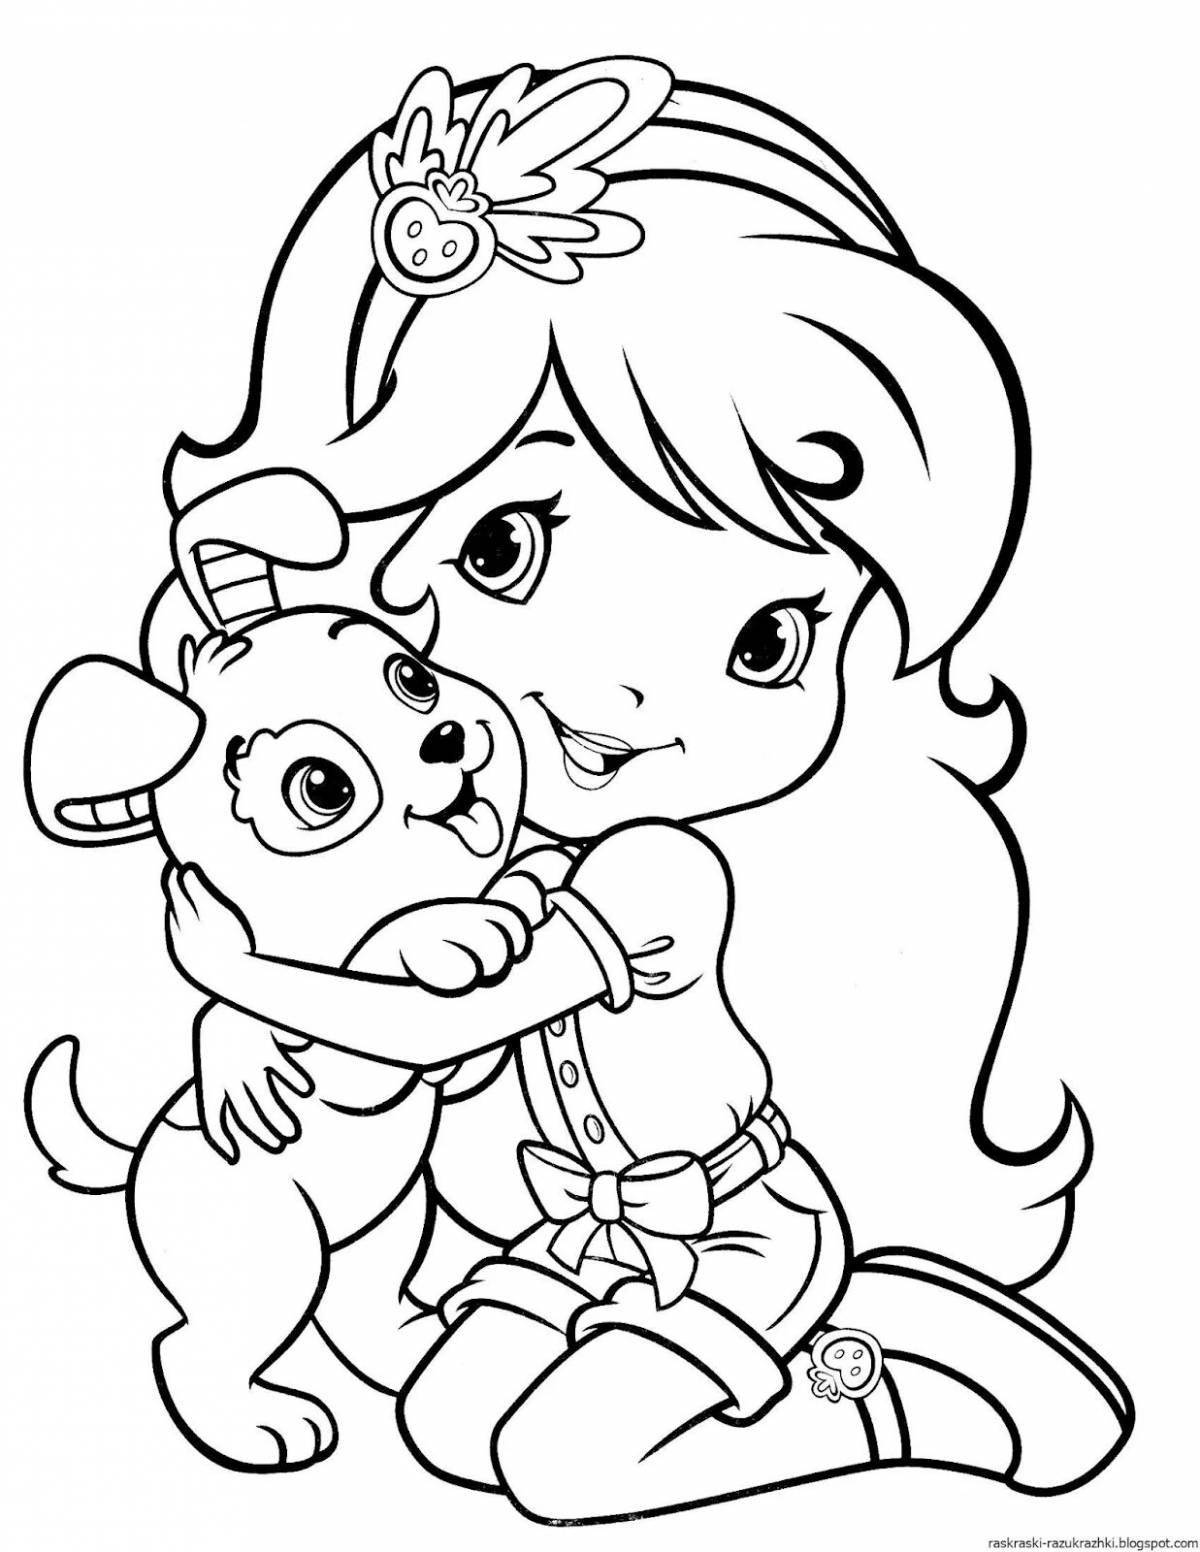 Holiday coloring book for girls cartoon